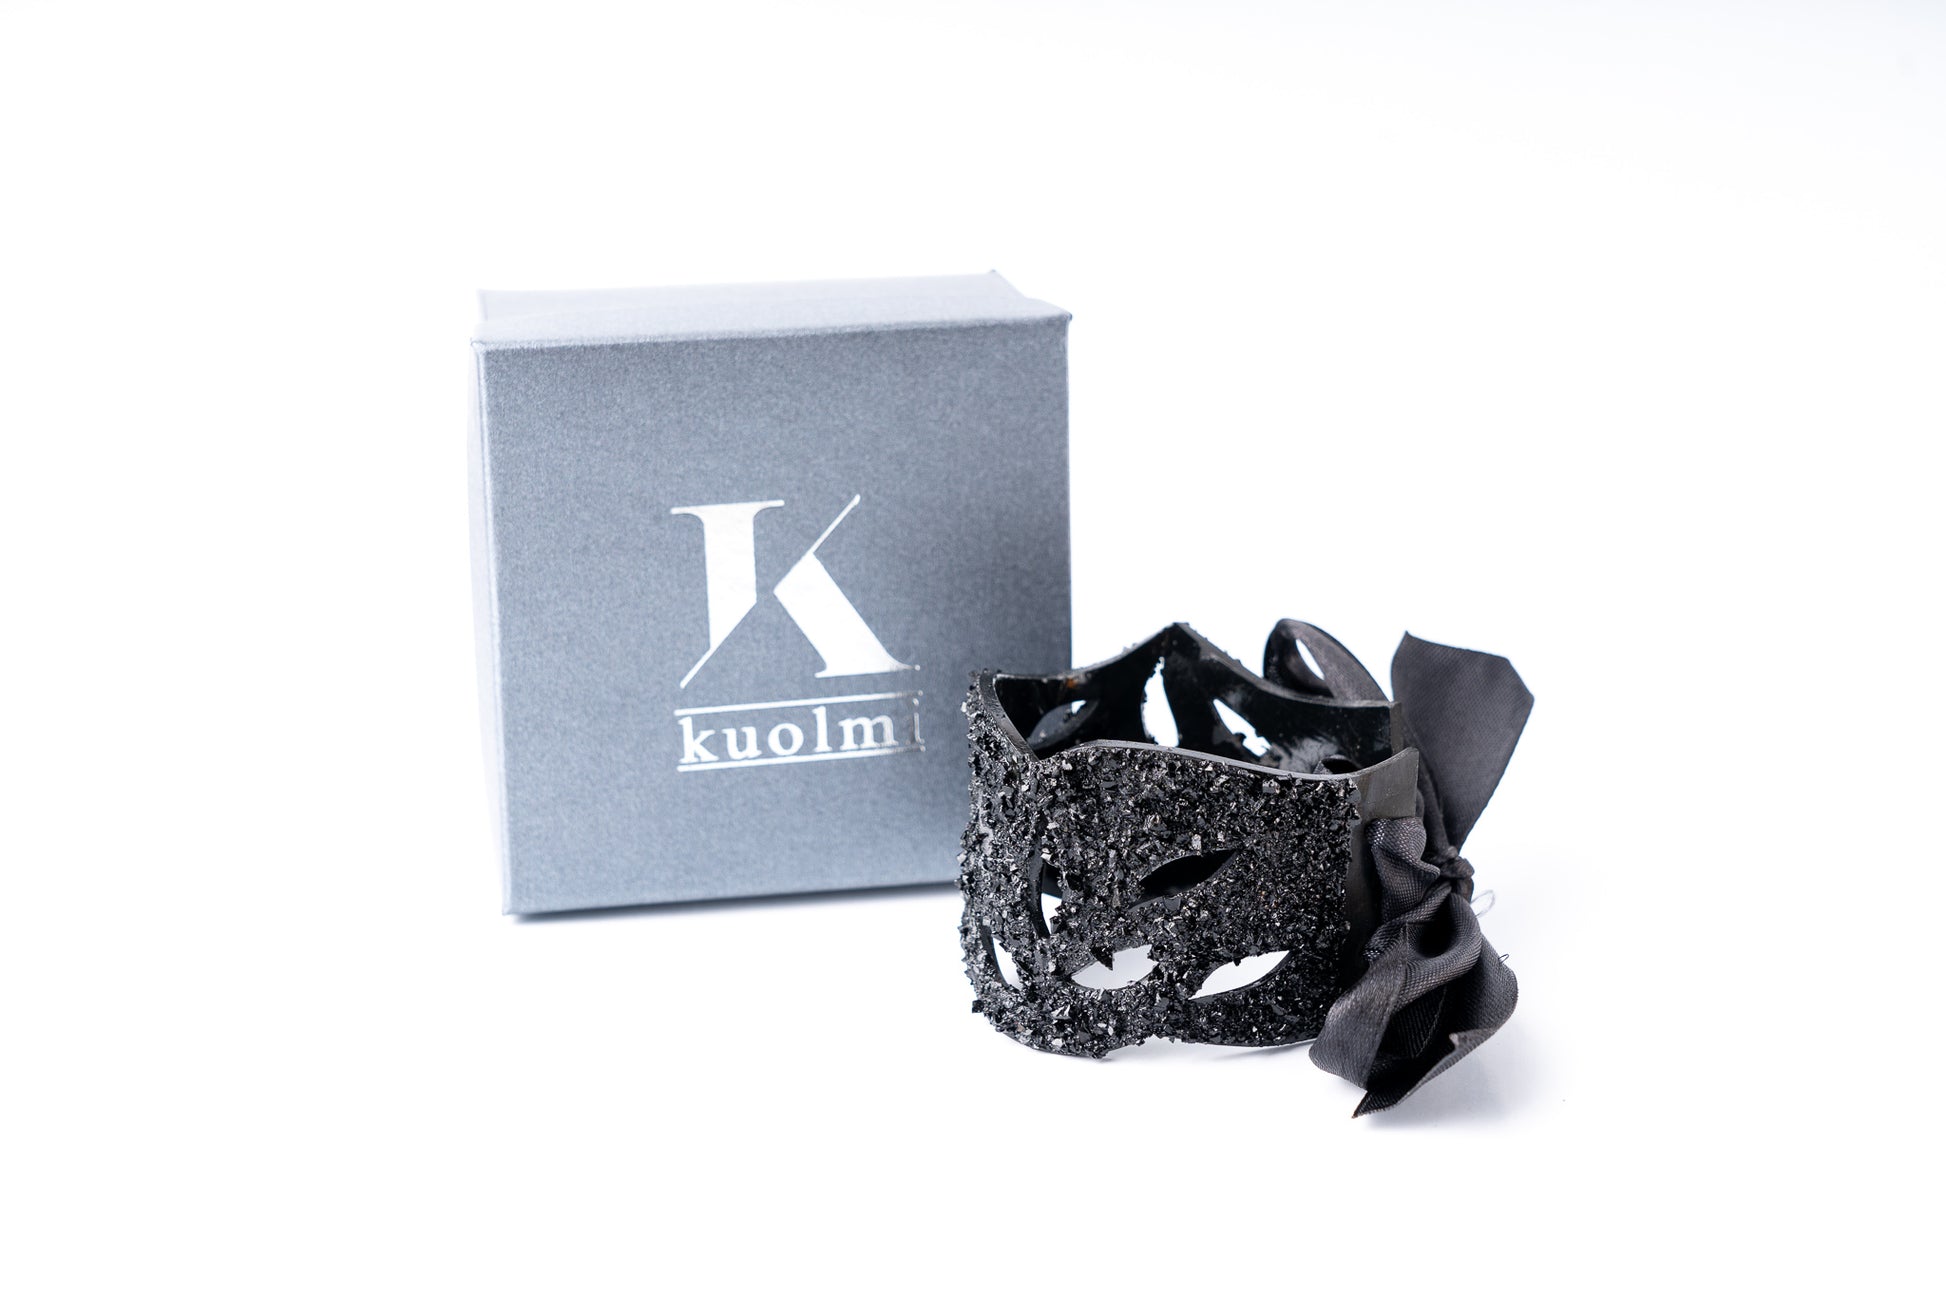 The KUOLMi Lace bracelet is made of 10 million-year-old stone. Due to its black luster and special organic shape, each piece is unique and unrepeatable in its appearance. It is made entirely by hand from coal and stainless steel. The size is adjustable. Jewelry is packaged in a gift box. The story about coal from which the bracelet was made is included as a gift.  Mighty and powerful.